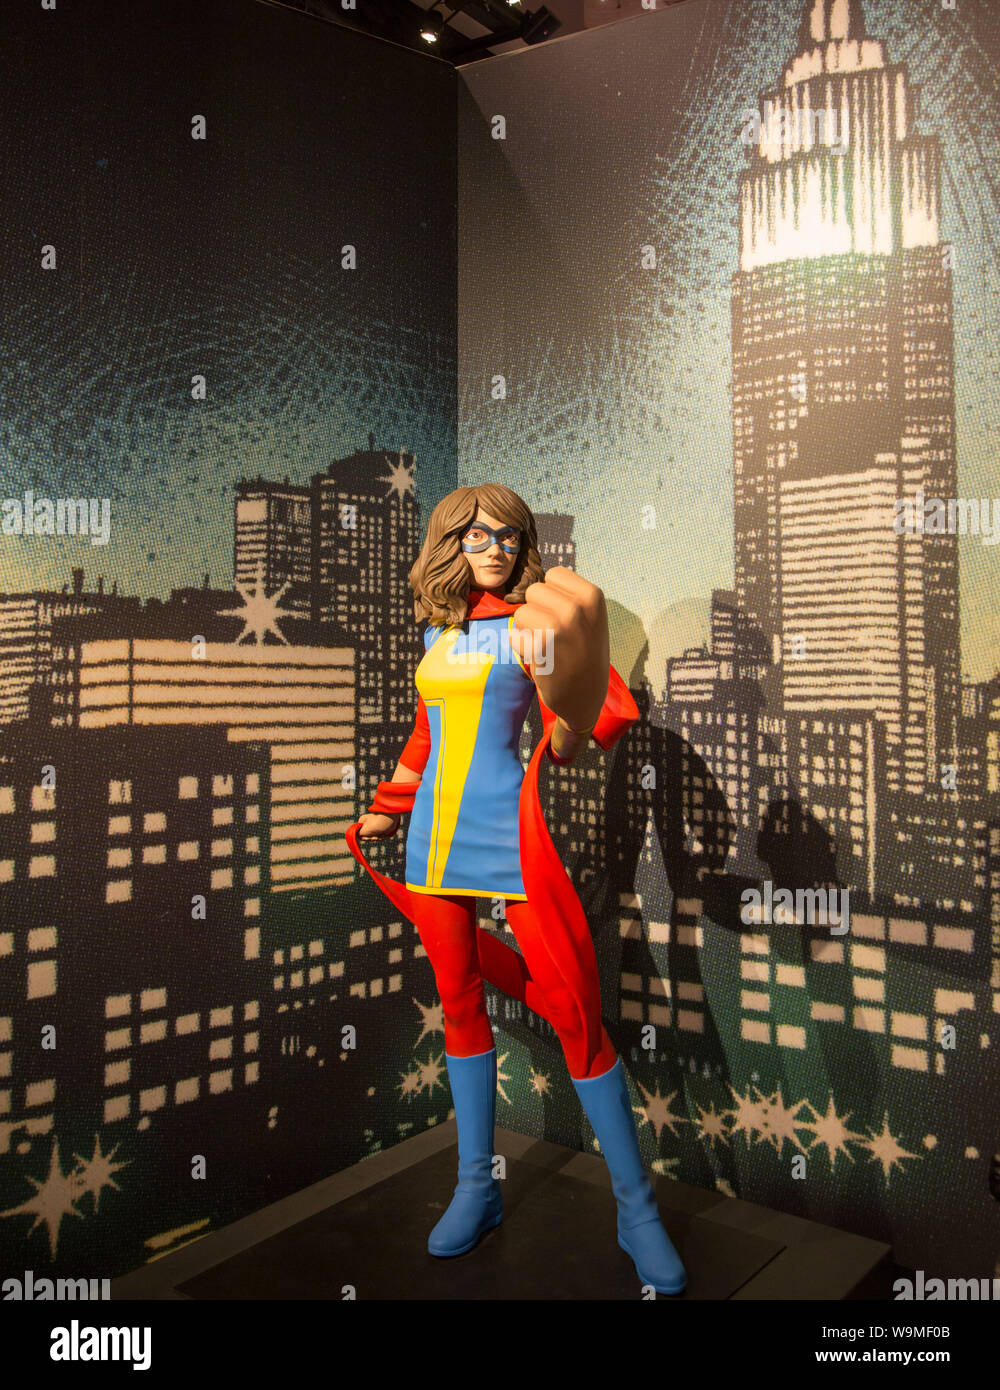 MARVEL: UNIVERSE OF SUPERHEROES, MUSEUM OF POP CULTURE,SEATTLE Stock Photo